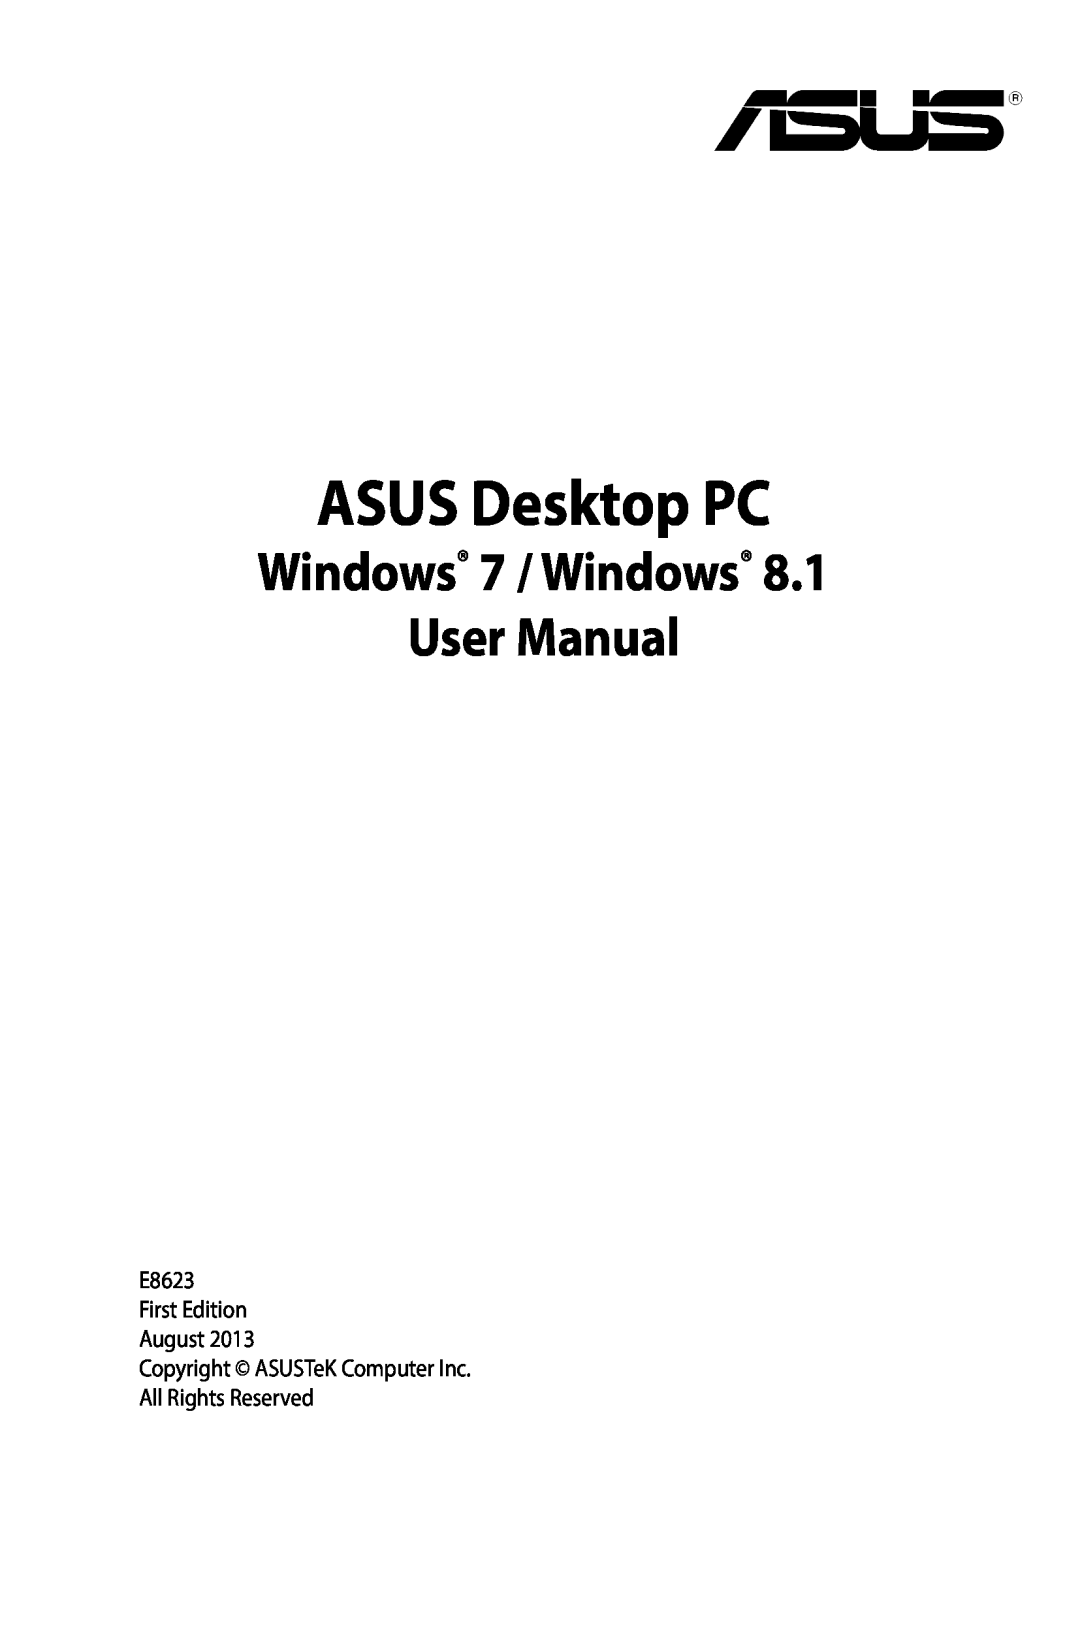 Asus G10AJ Windows 7 / Windows User Manual, E8623 First Edition August Copyright ASUSTeK Computer Inc, All Rights Reserved 